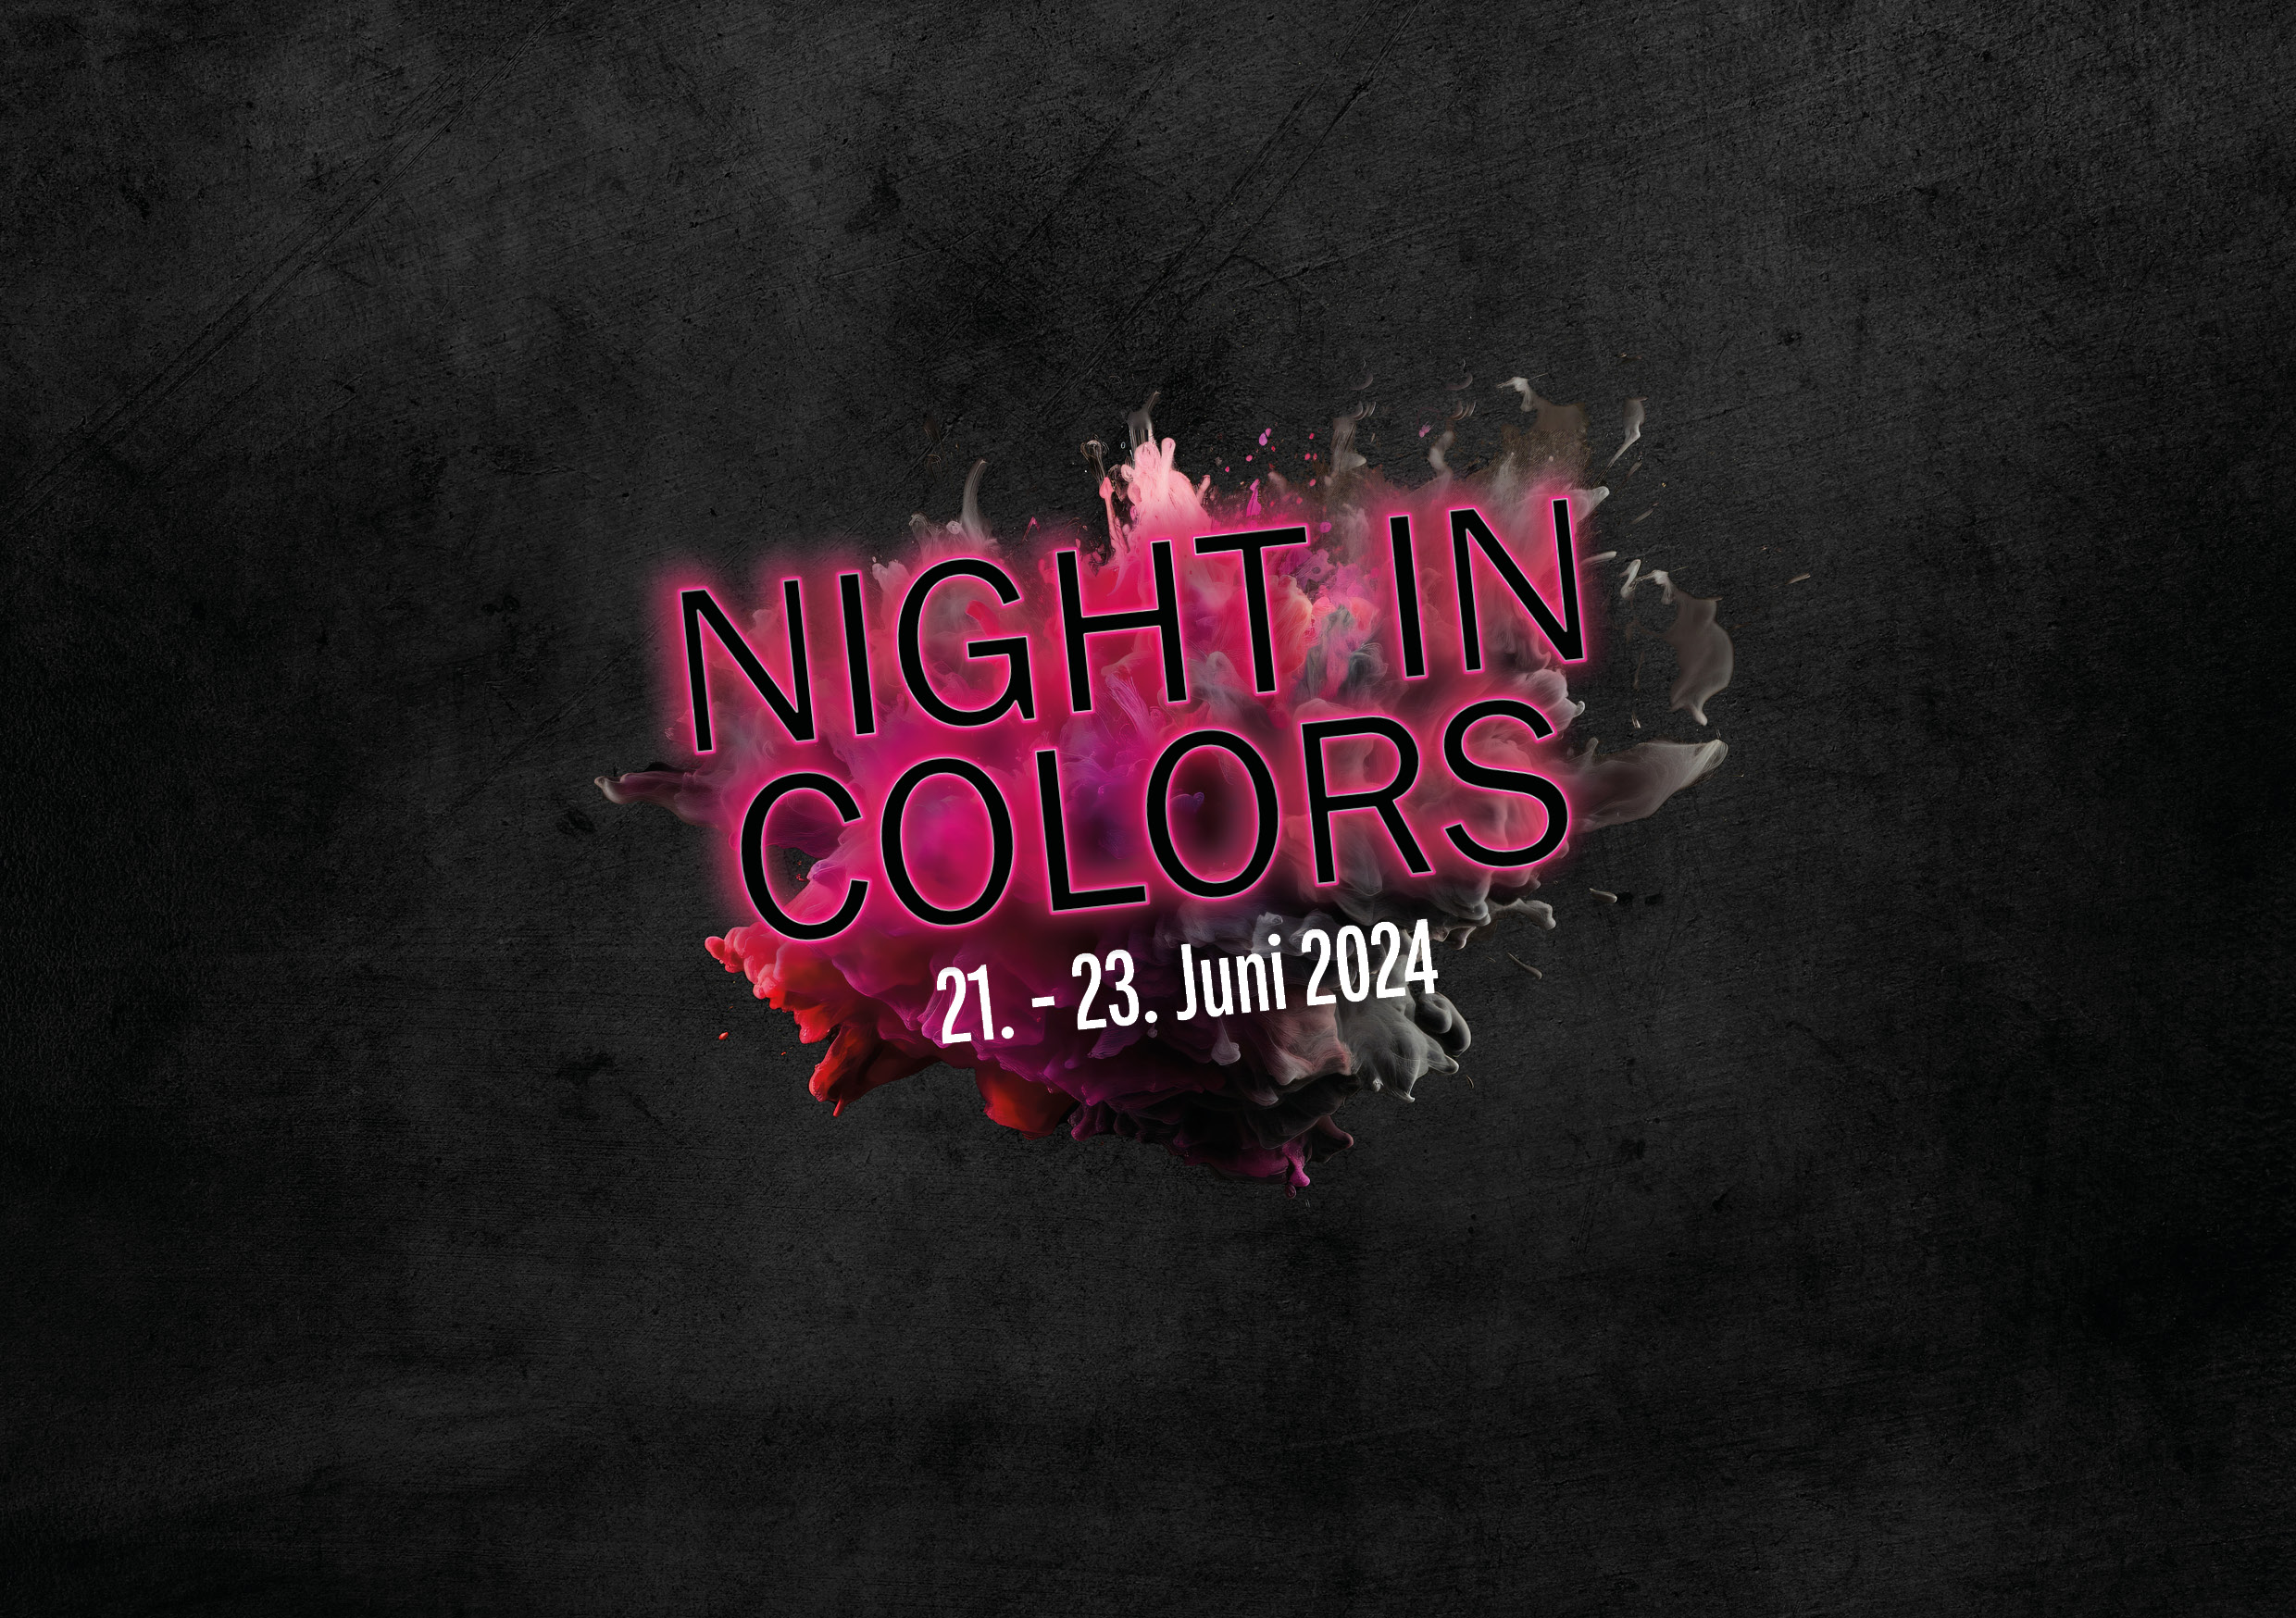 (c) Night-in-colors.at